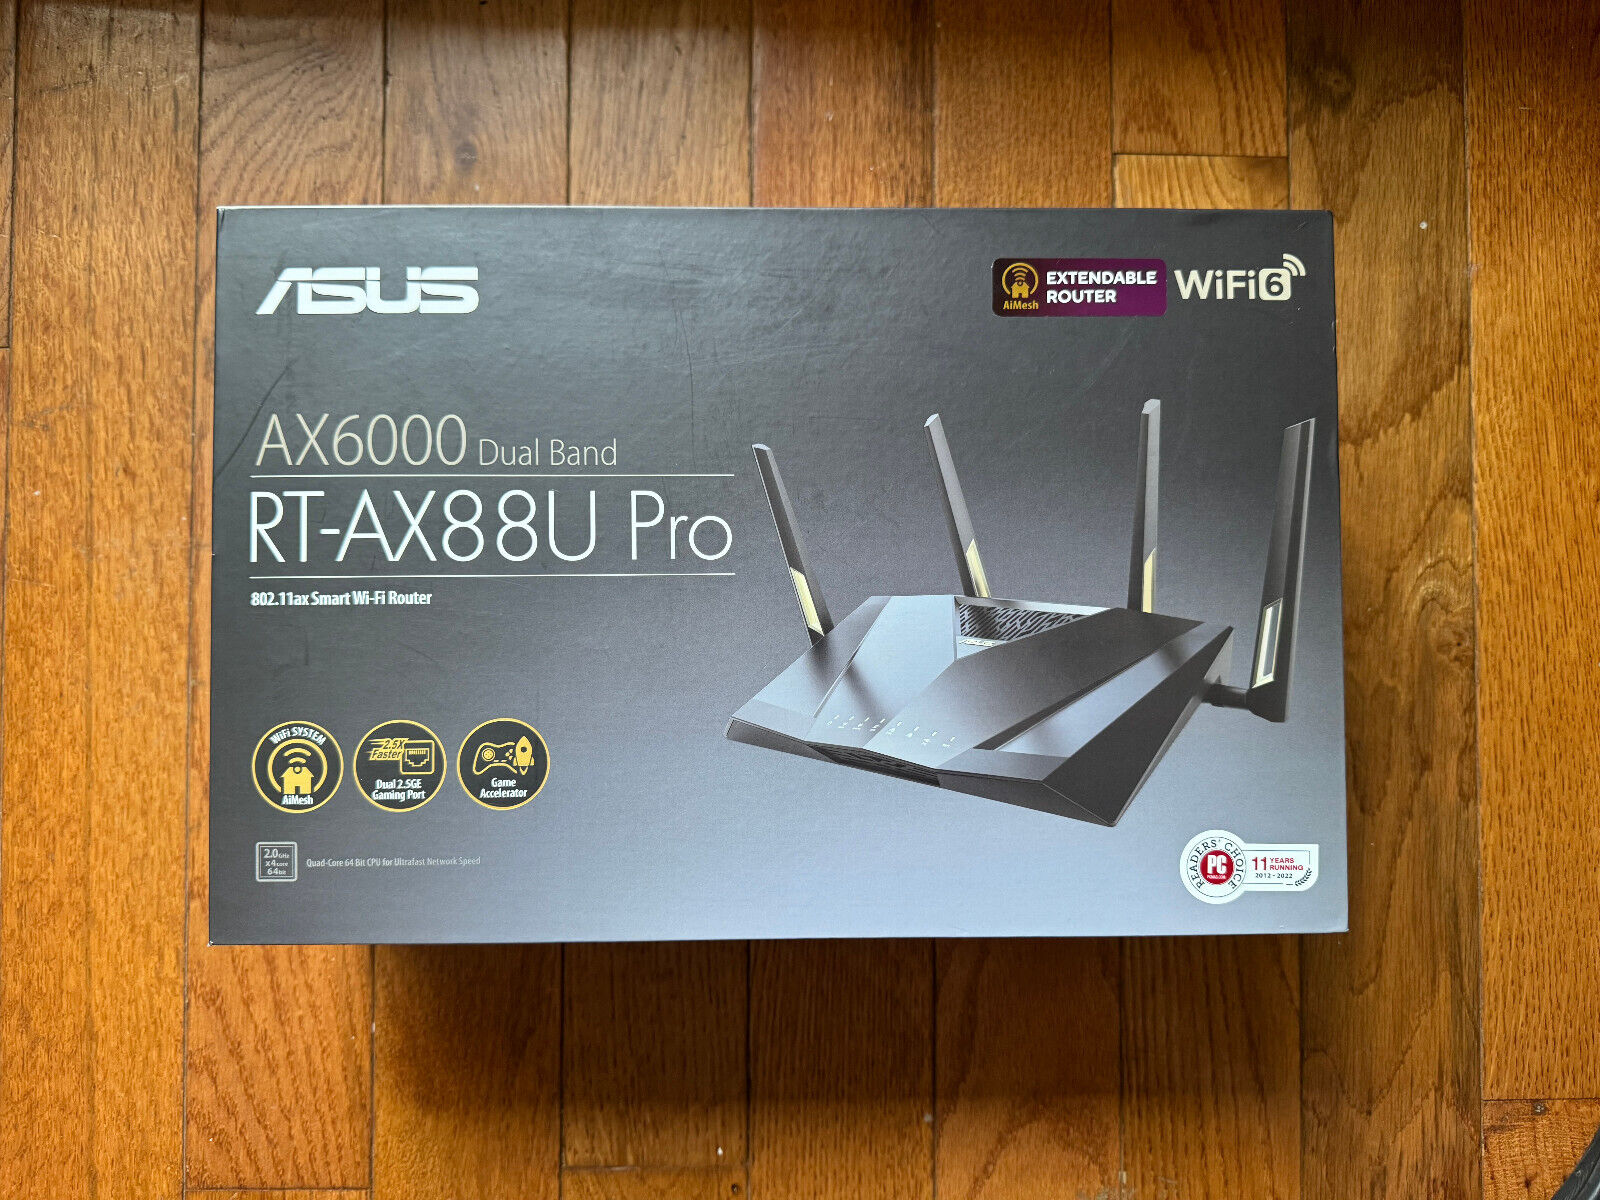 ASUS RT-AX88U PRO AX6000 Dual Band WiFi 6 Router, Dual 2.5G Port